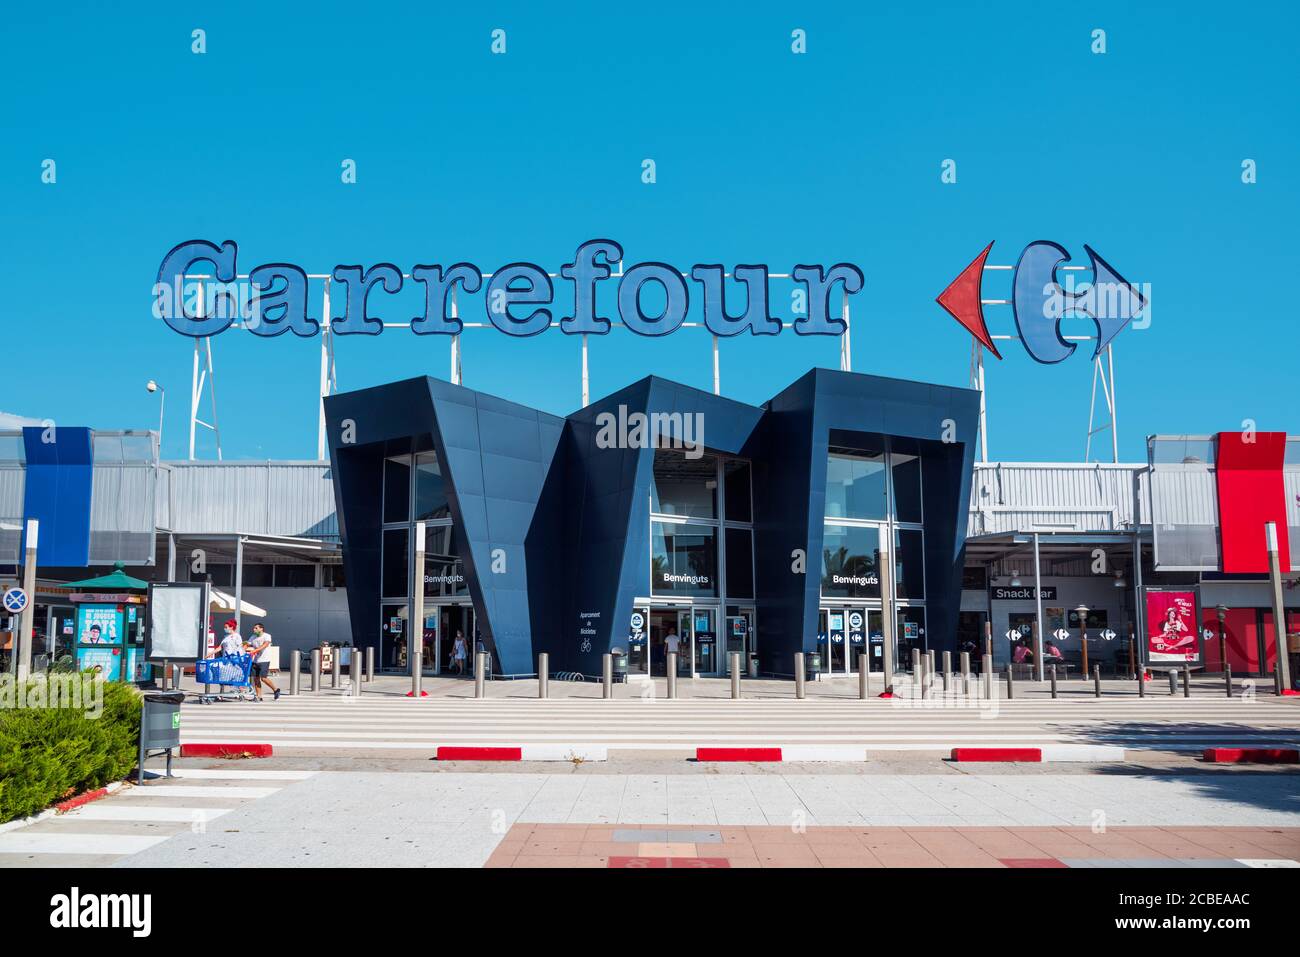 EL PRAT DE LLOBREGAT, SPAIN - AUGUST 7, 2020: A view of the main facade of the Carrefour hypermarket, a popular hypermarket chain in Spain, and one of Stock Photo